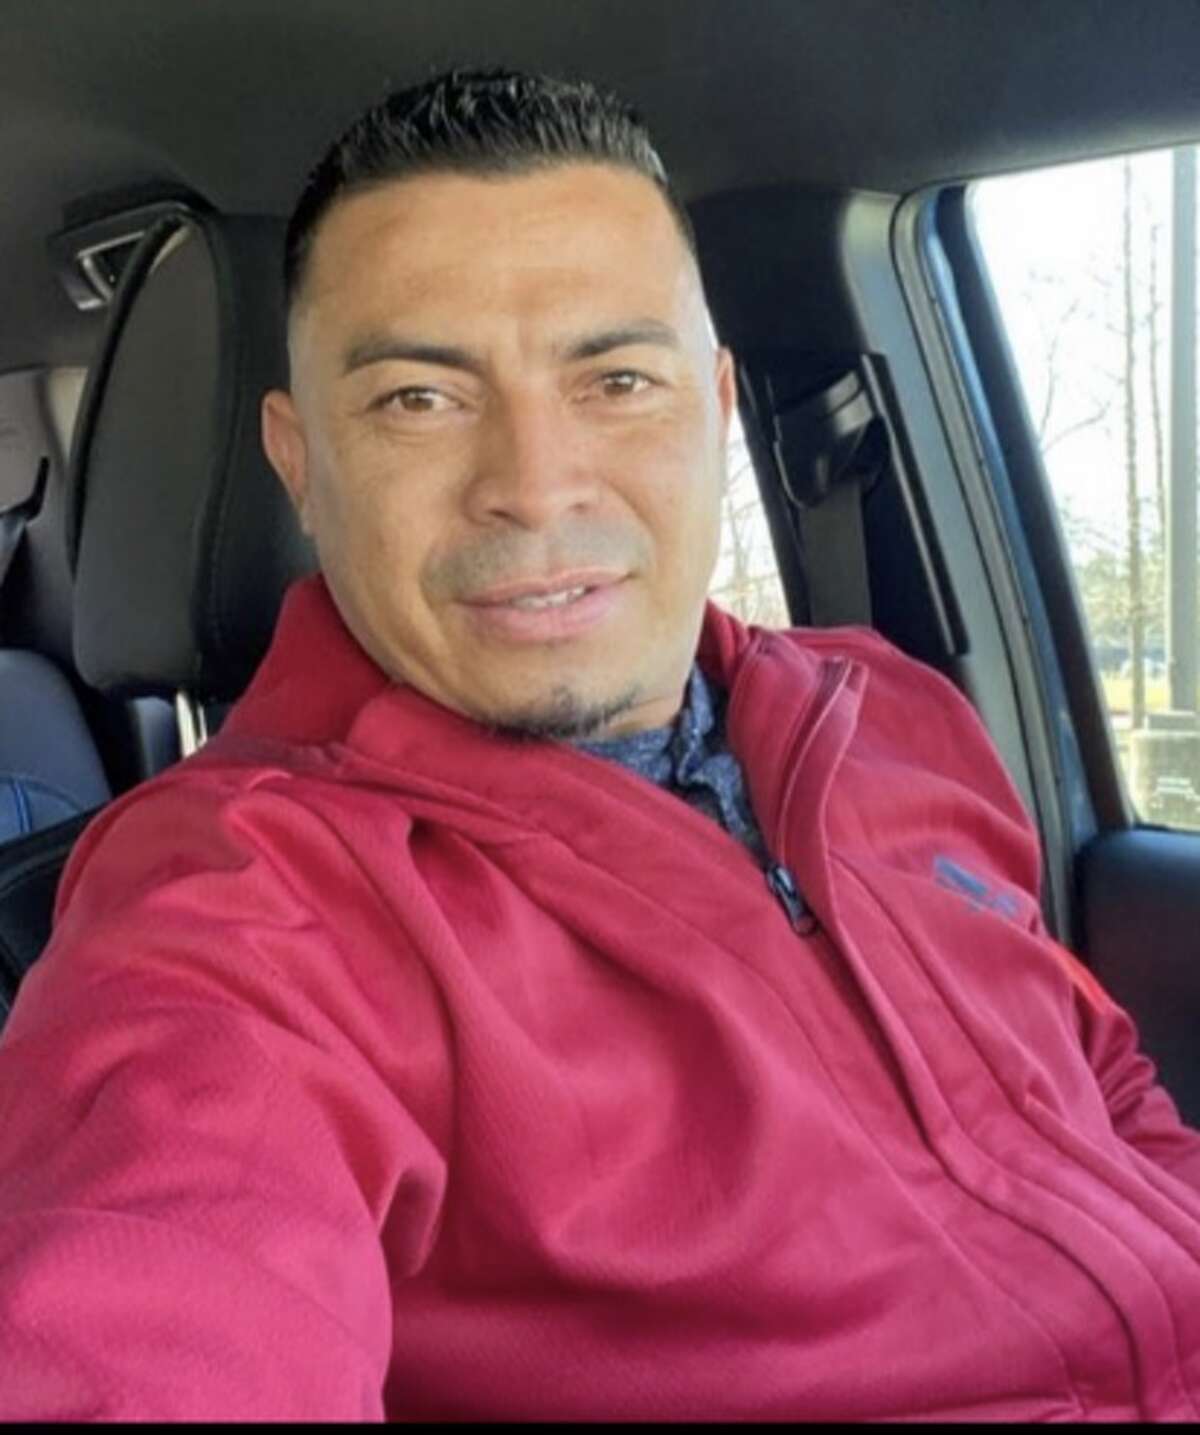 Edwin Henriquez-Cuellar is wanted in connection to the March 6 stabbing death of his ex-girlfriend's new boyfriend, according to Houston police